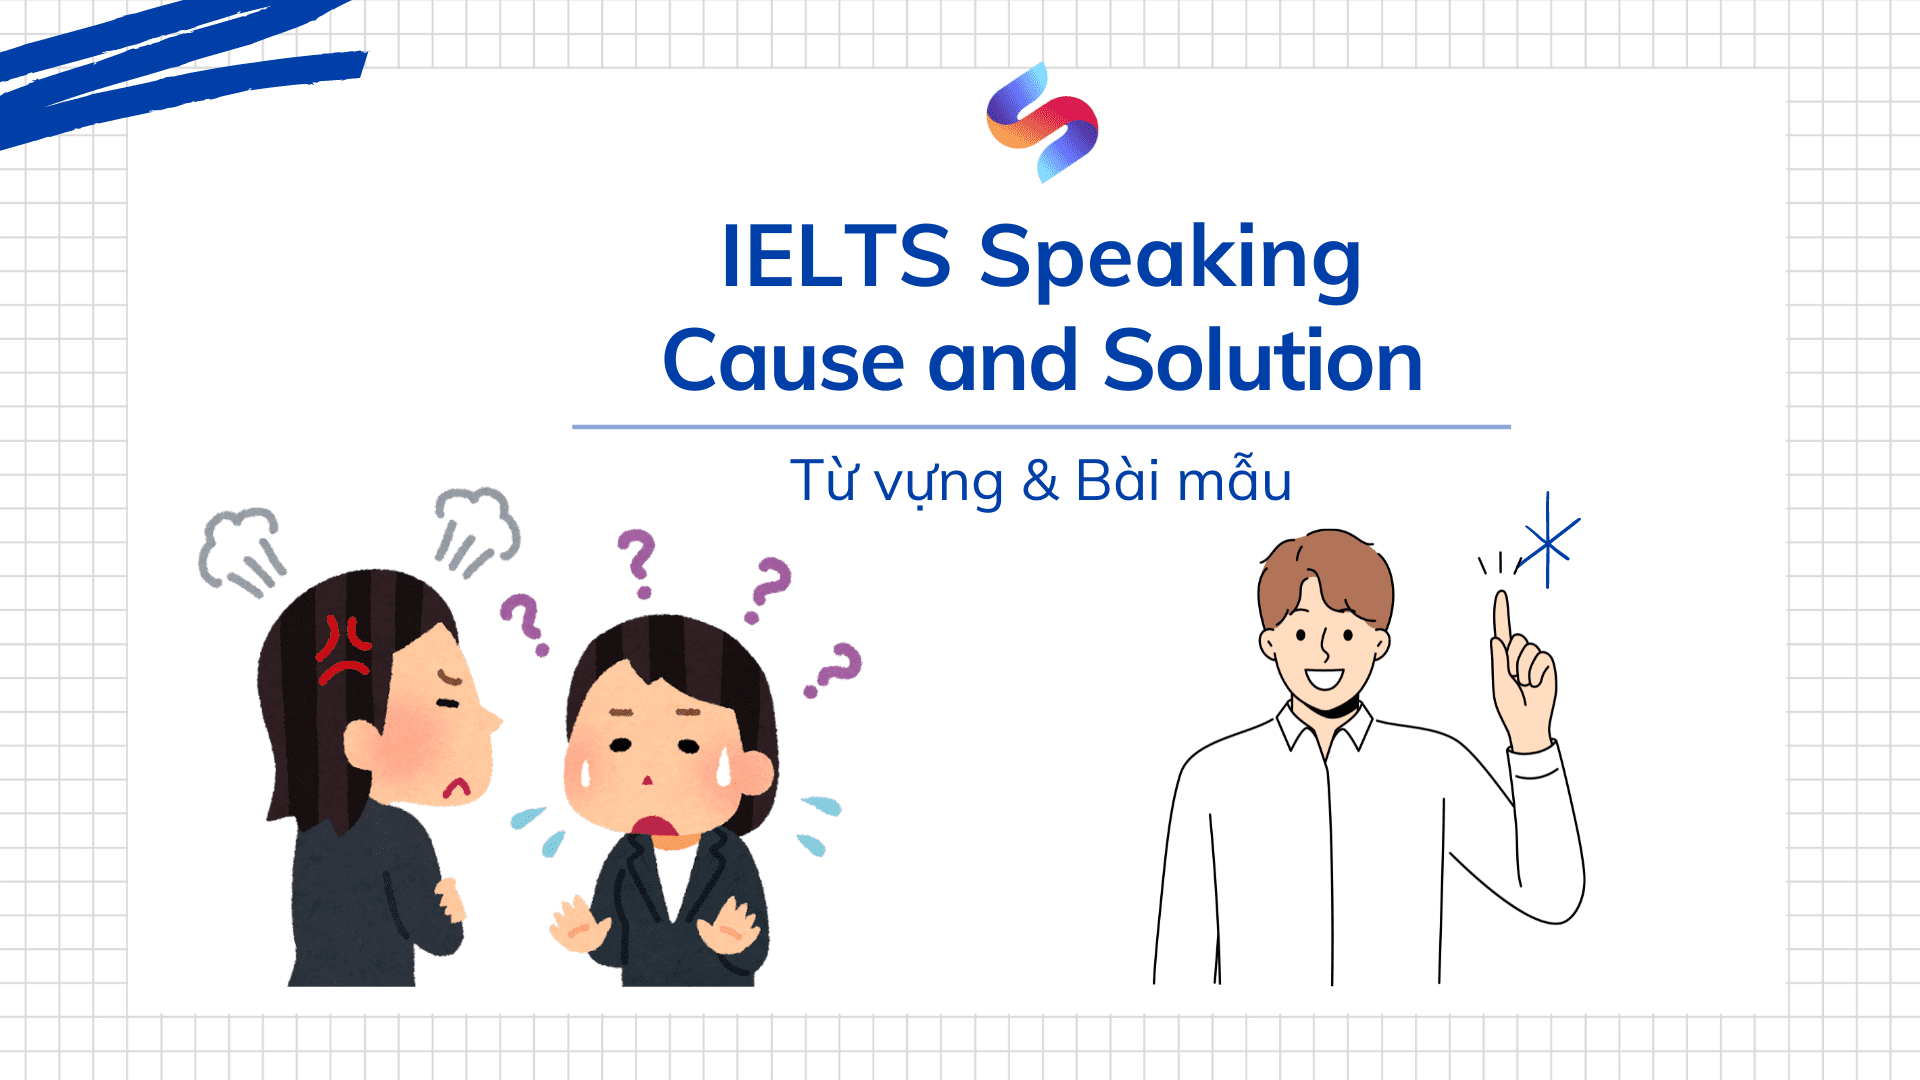 IELTS Writing task 2: Causes & Solutions